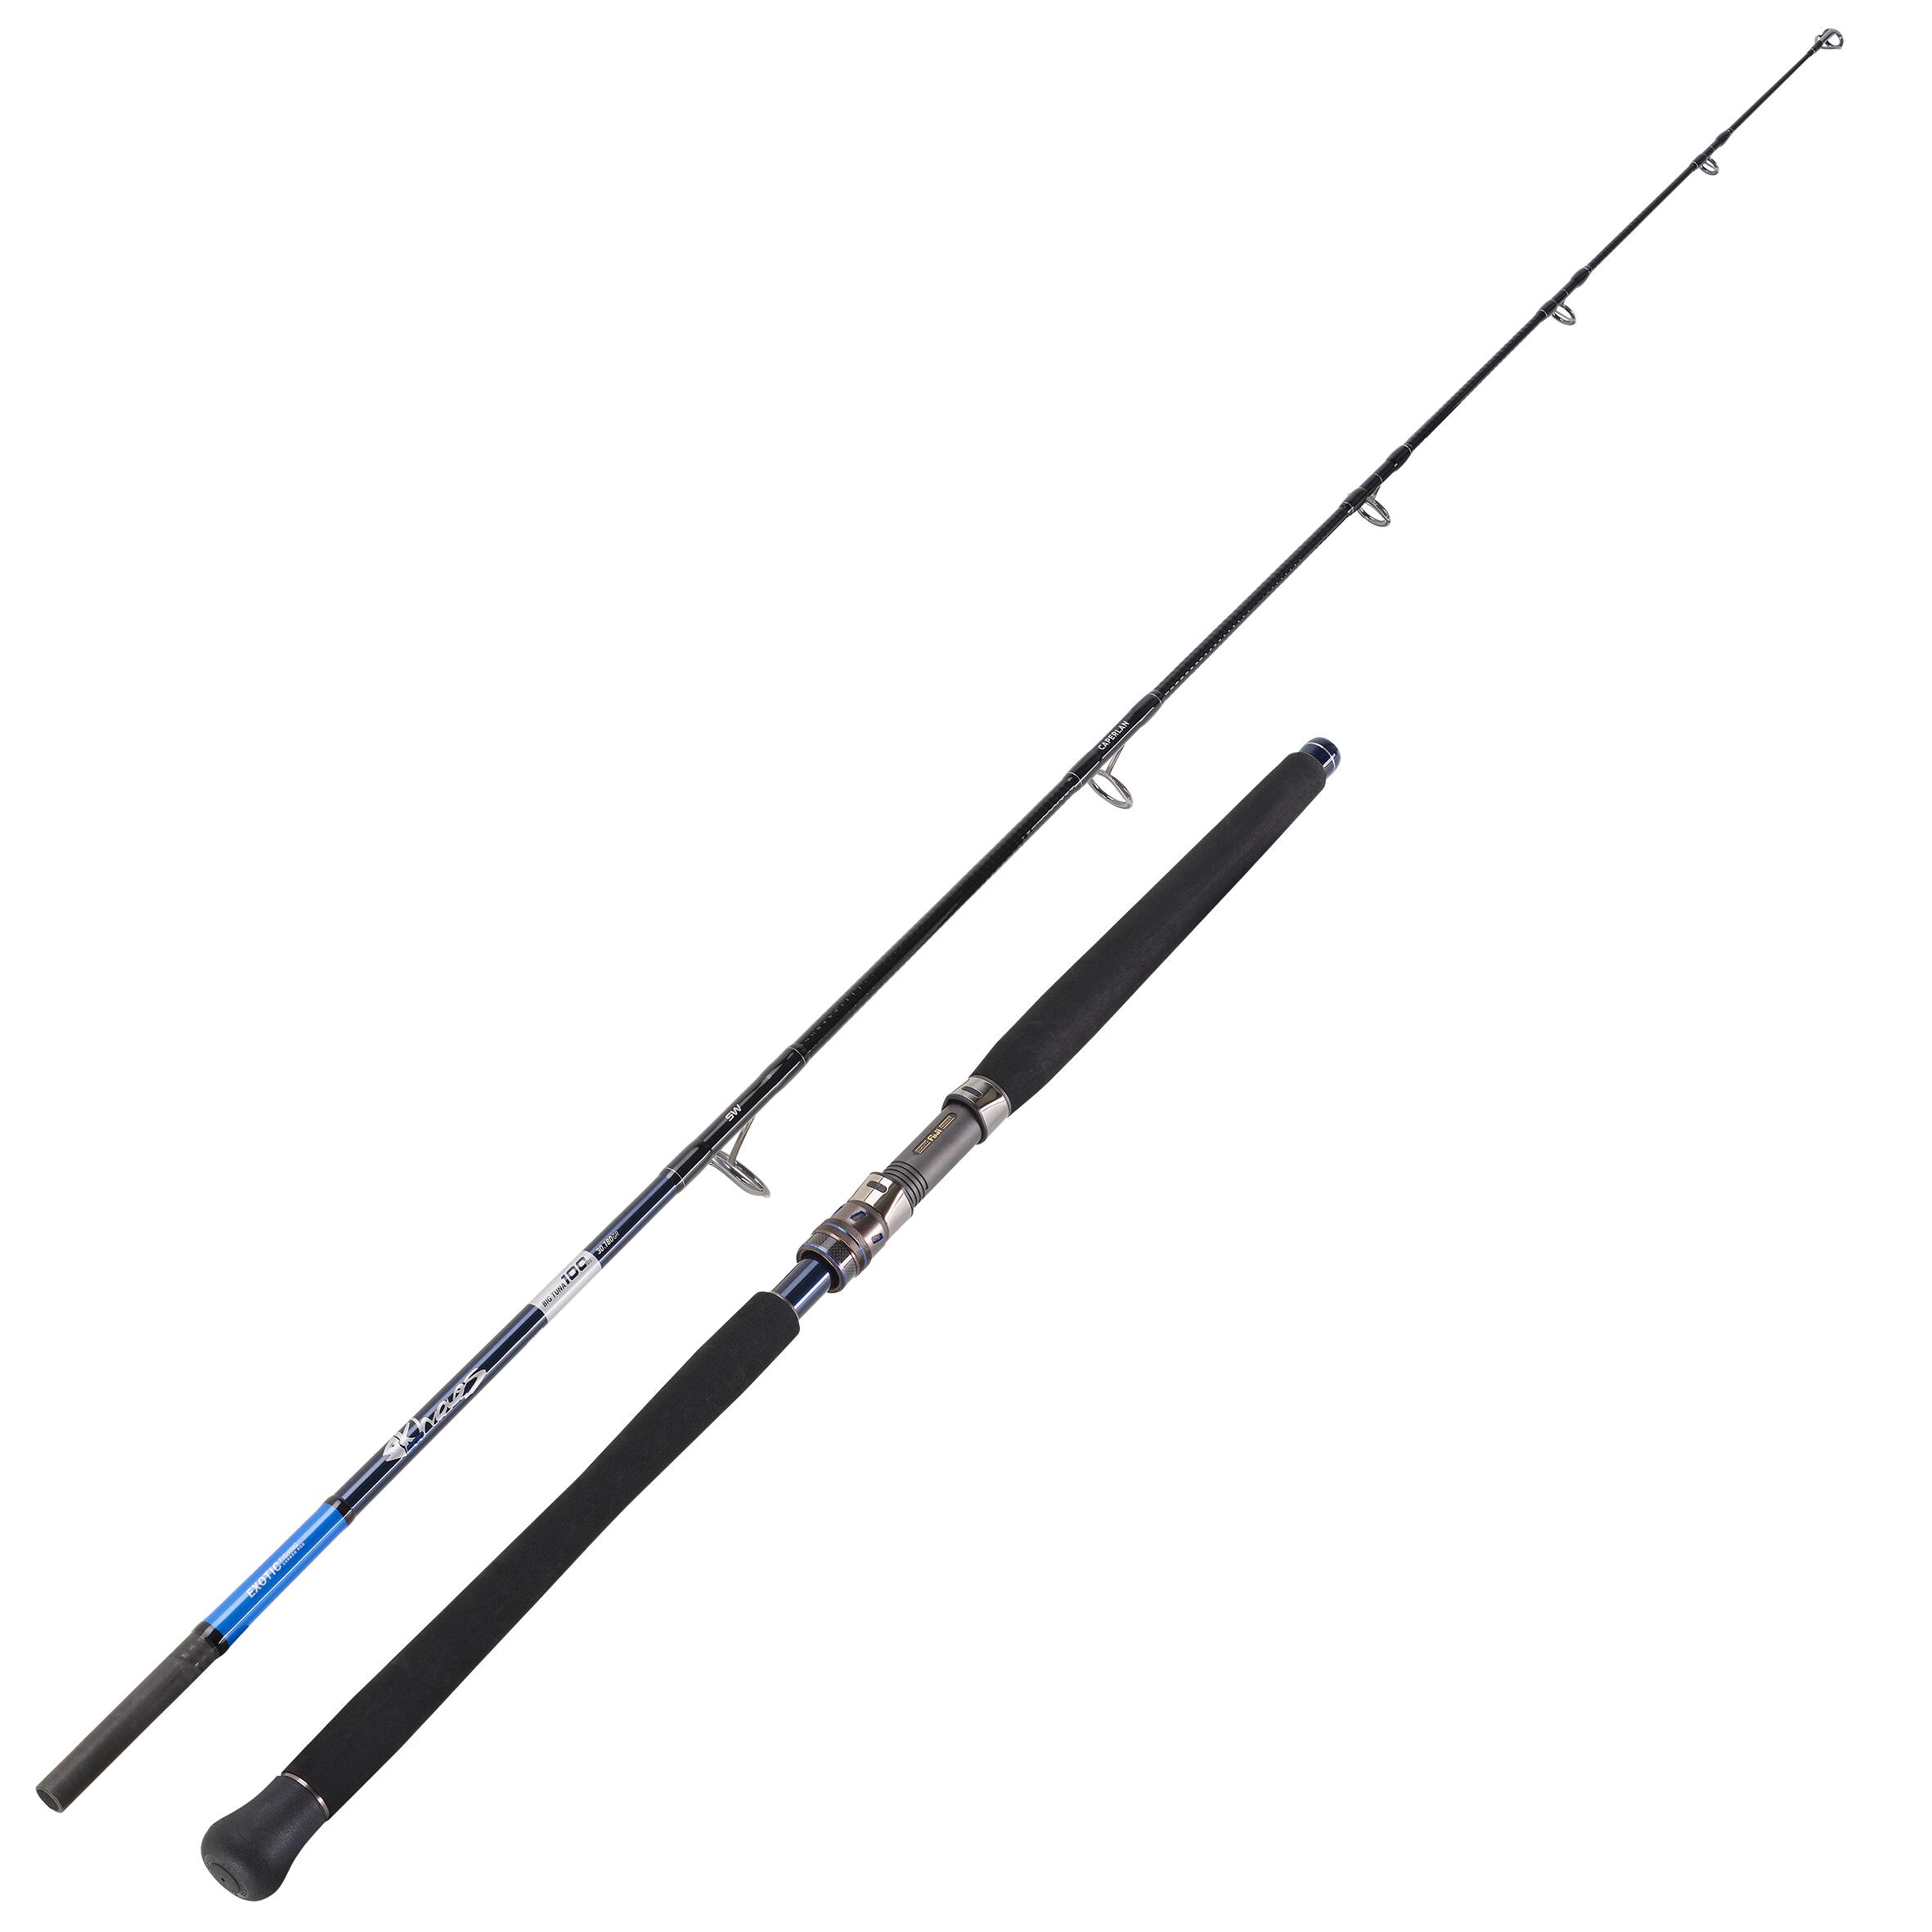 Sea Fishing Rods and reels Decathlon